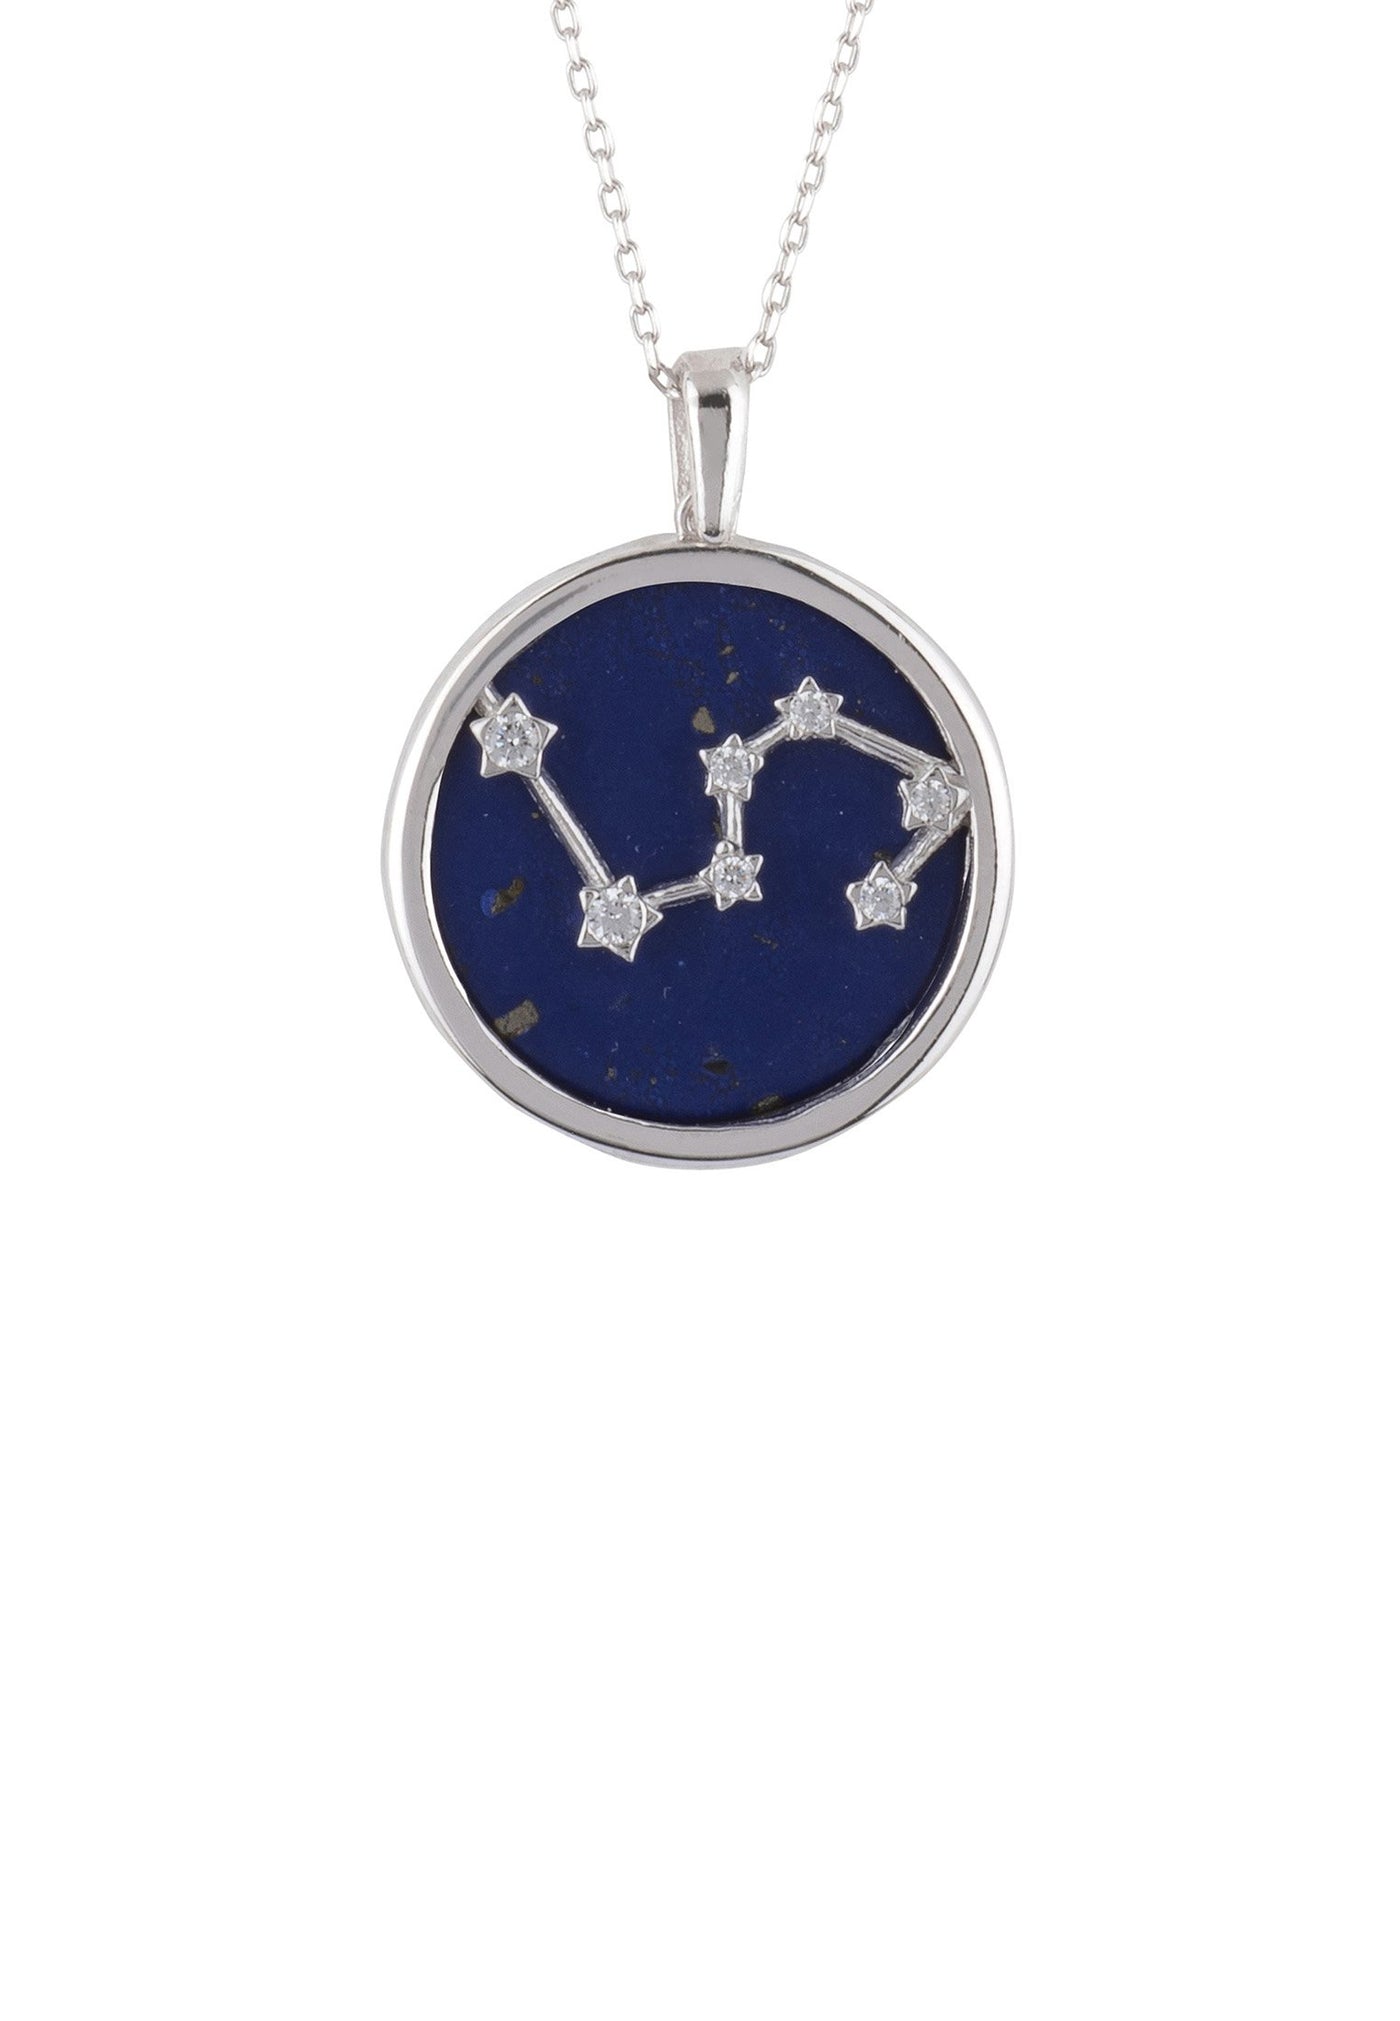 Leo necklace - 925 sterling silver - lapis lazuli with white zirconia